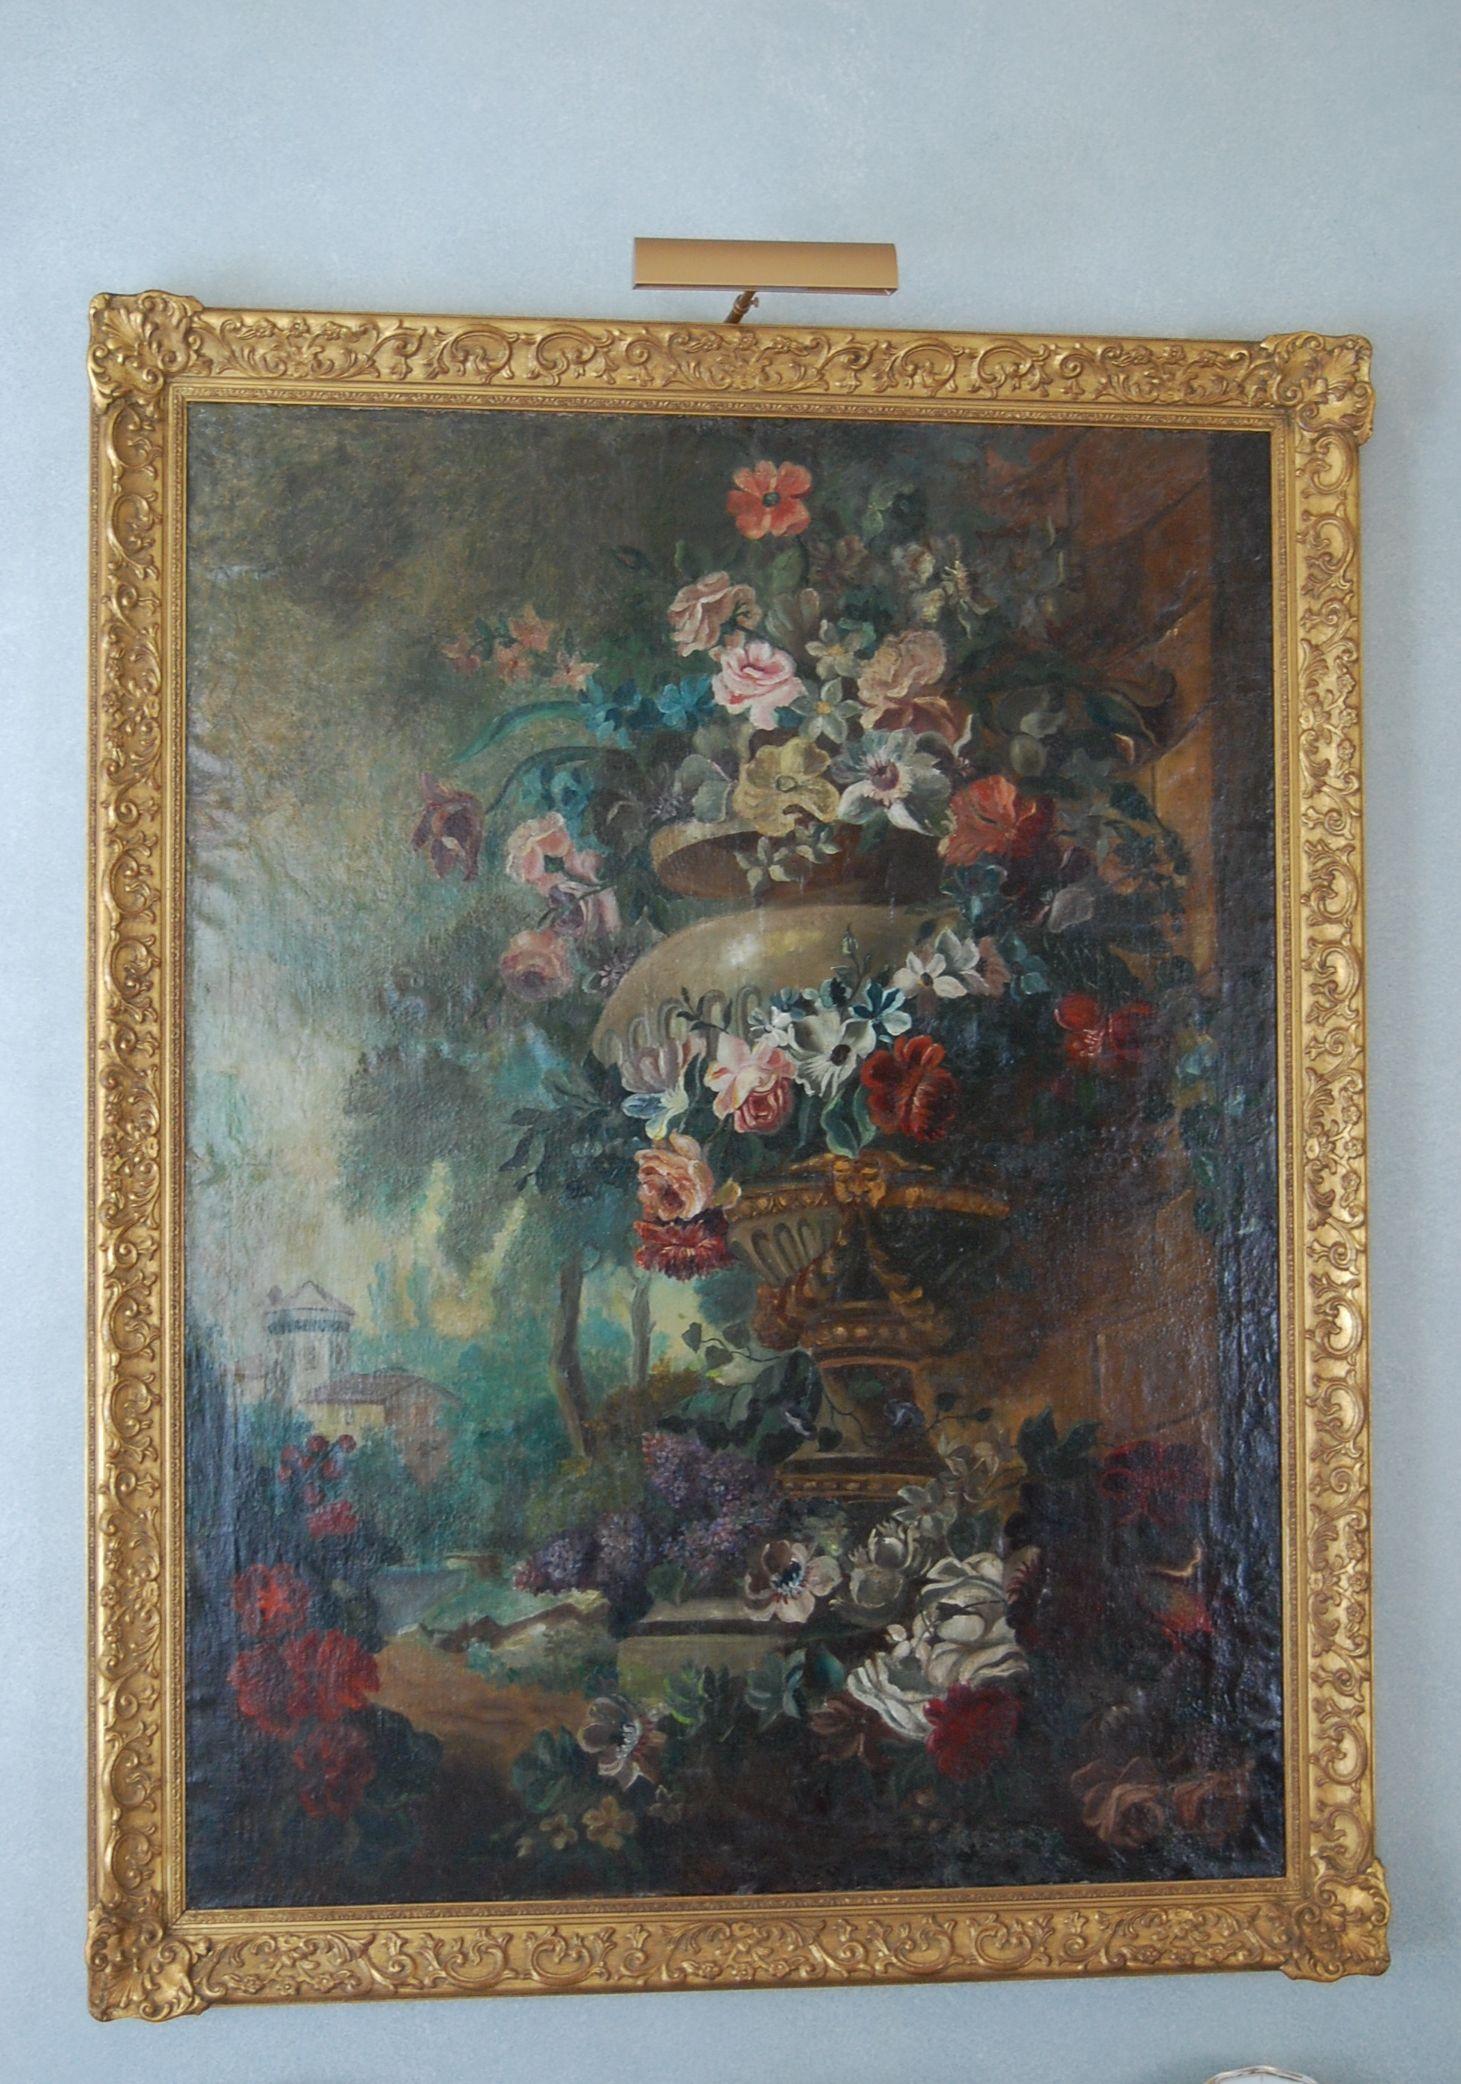 A large painting featuring an exterior marble urn with overflowing flowers set in a garden, likely Dutch and mid-19th century. Very good overall condition in a newer ornate gold leaf frame.